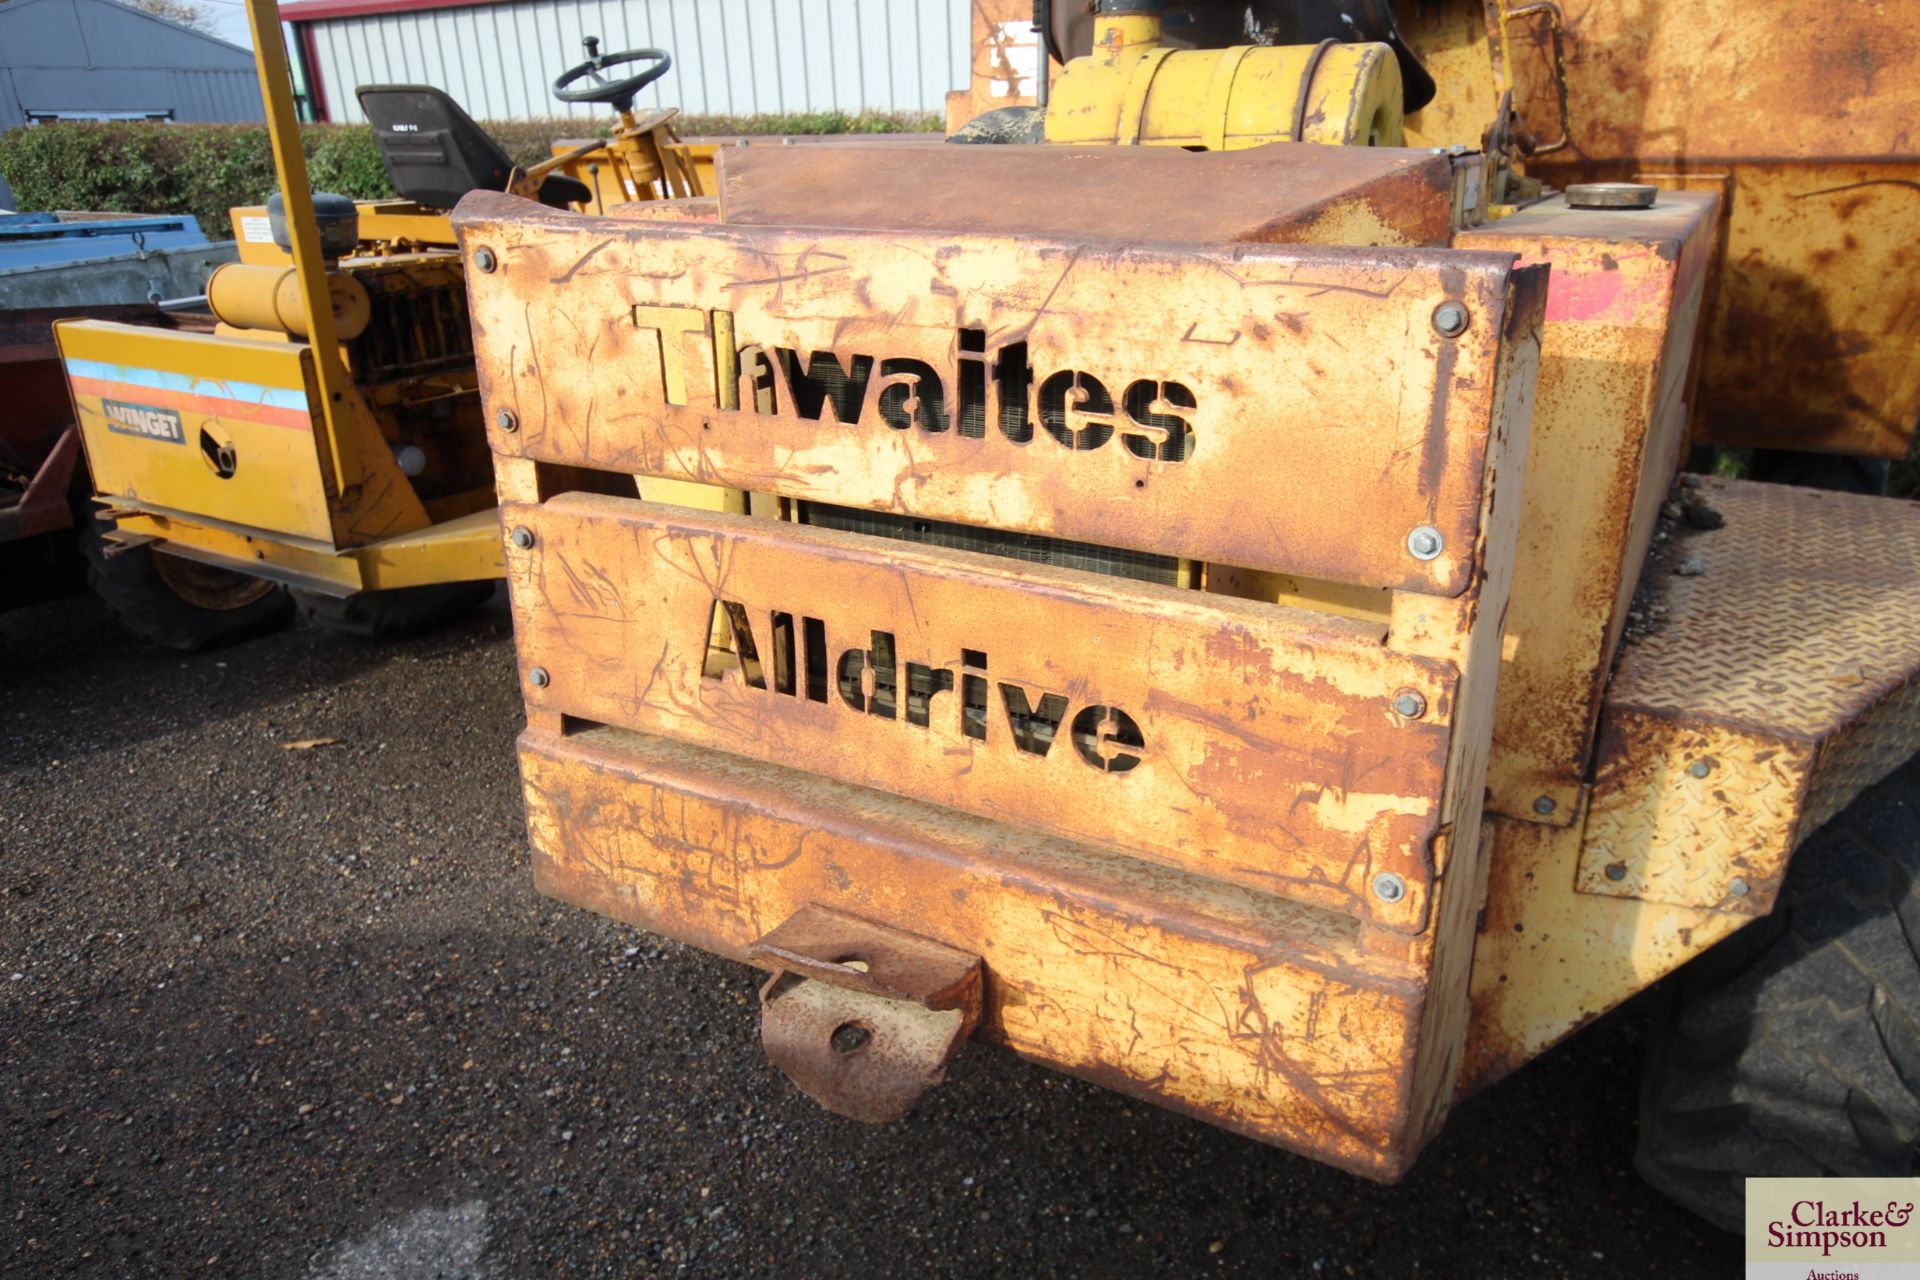 Thwaites Alldrive 4WD dumper. 12.0/80-18 wheels and tyres. - Image 12 of 18